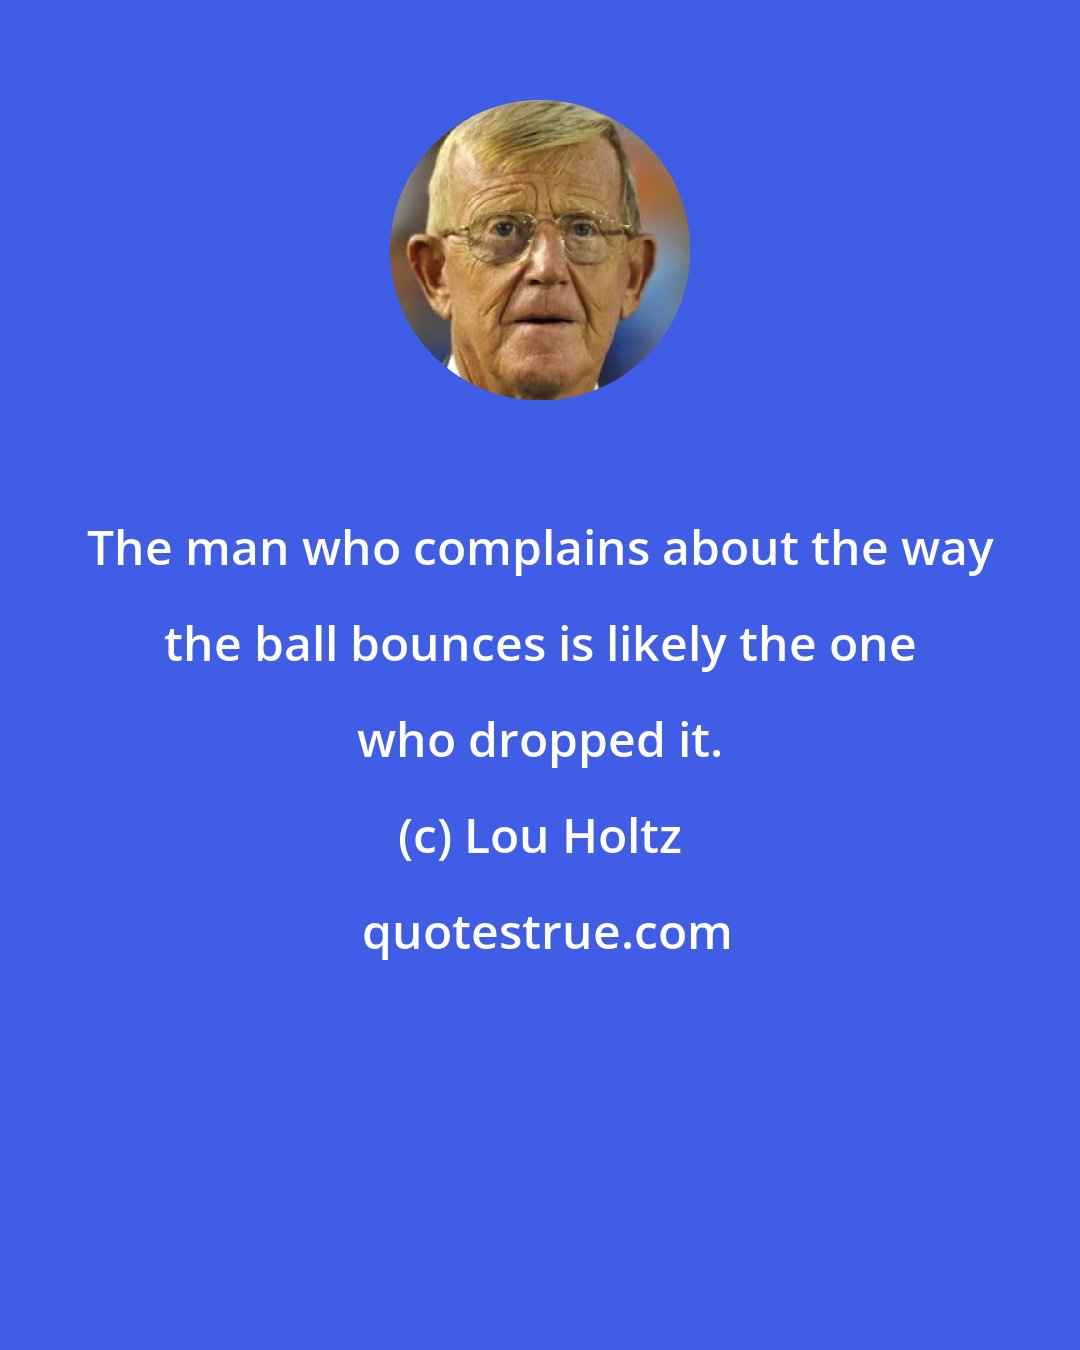 Lou Holtz: The man who complains about the way the ball bounces is likely the one who dropped it.